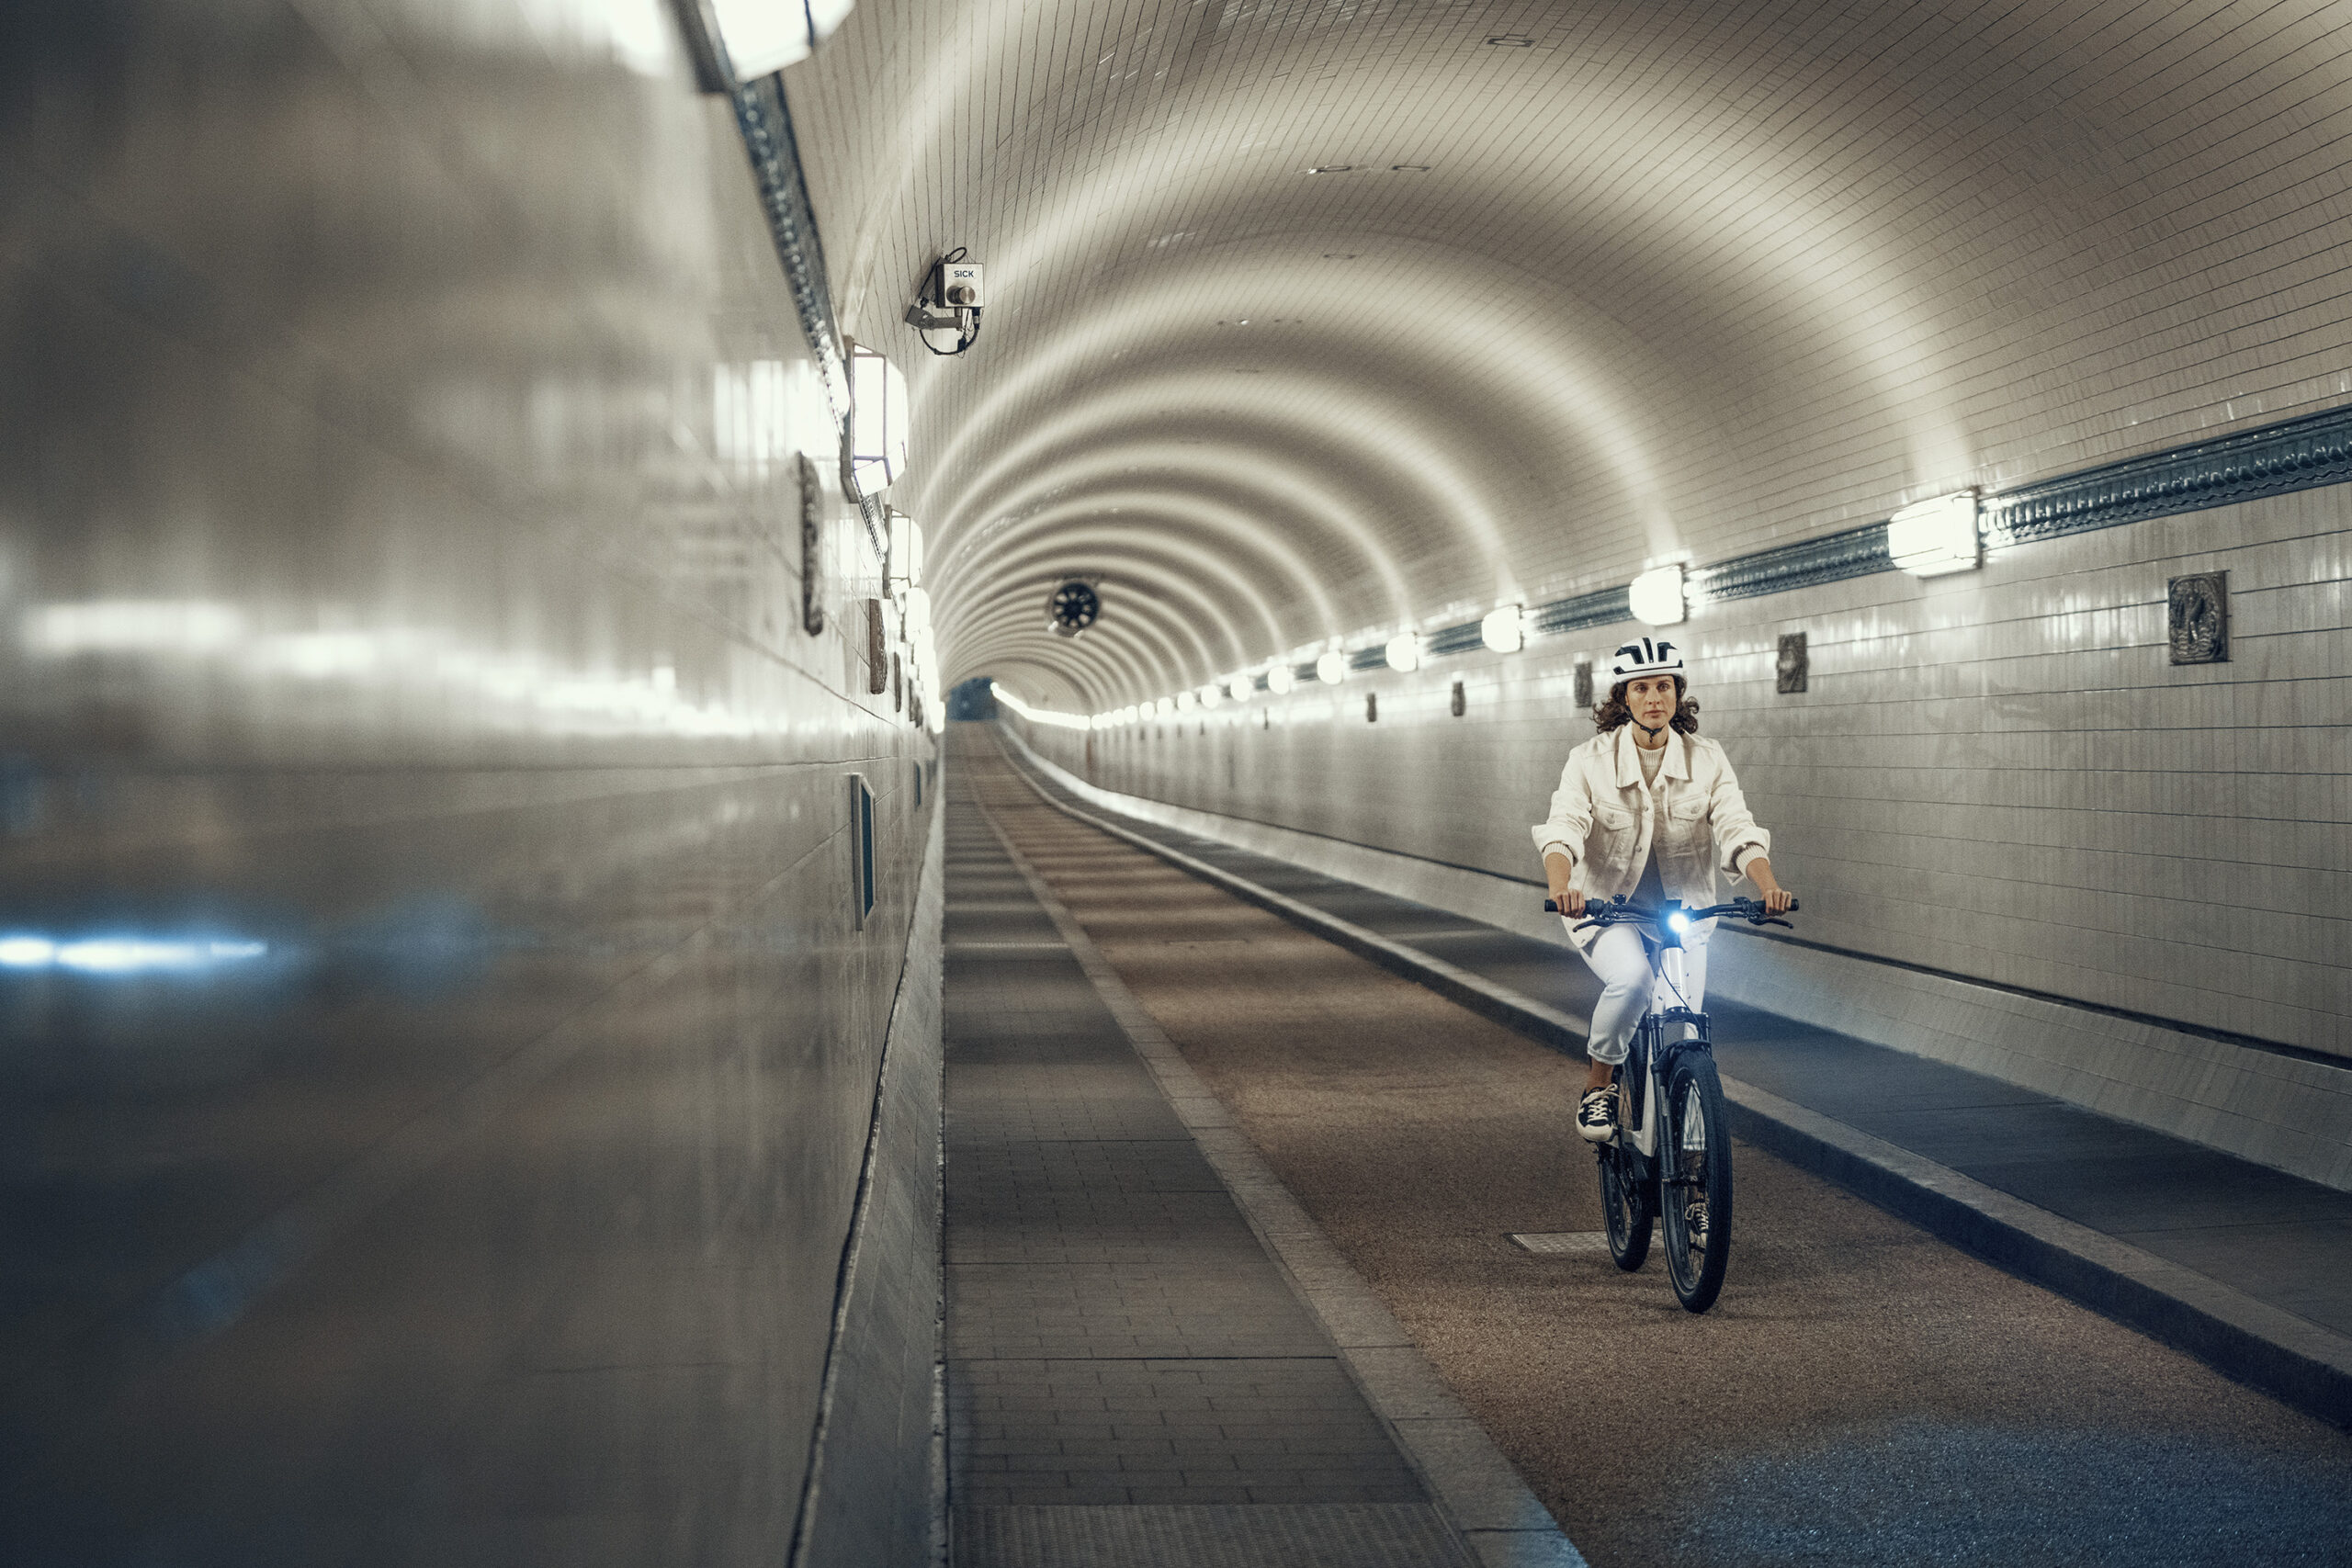 A girl is riding an ebike in a tunnel